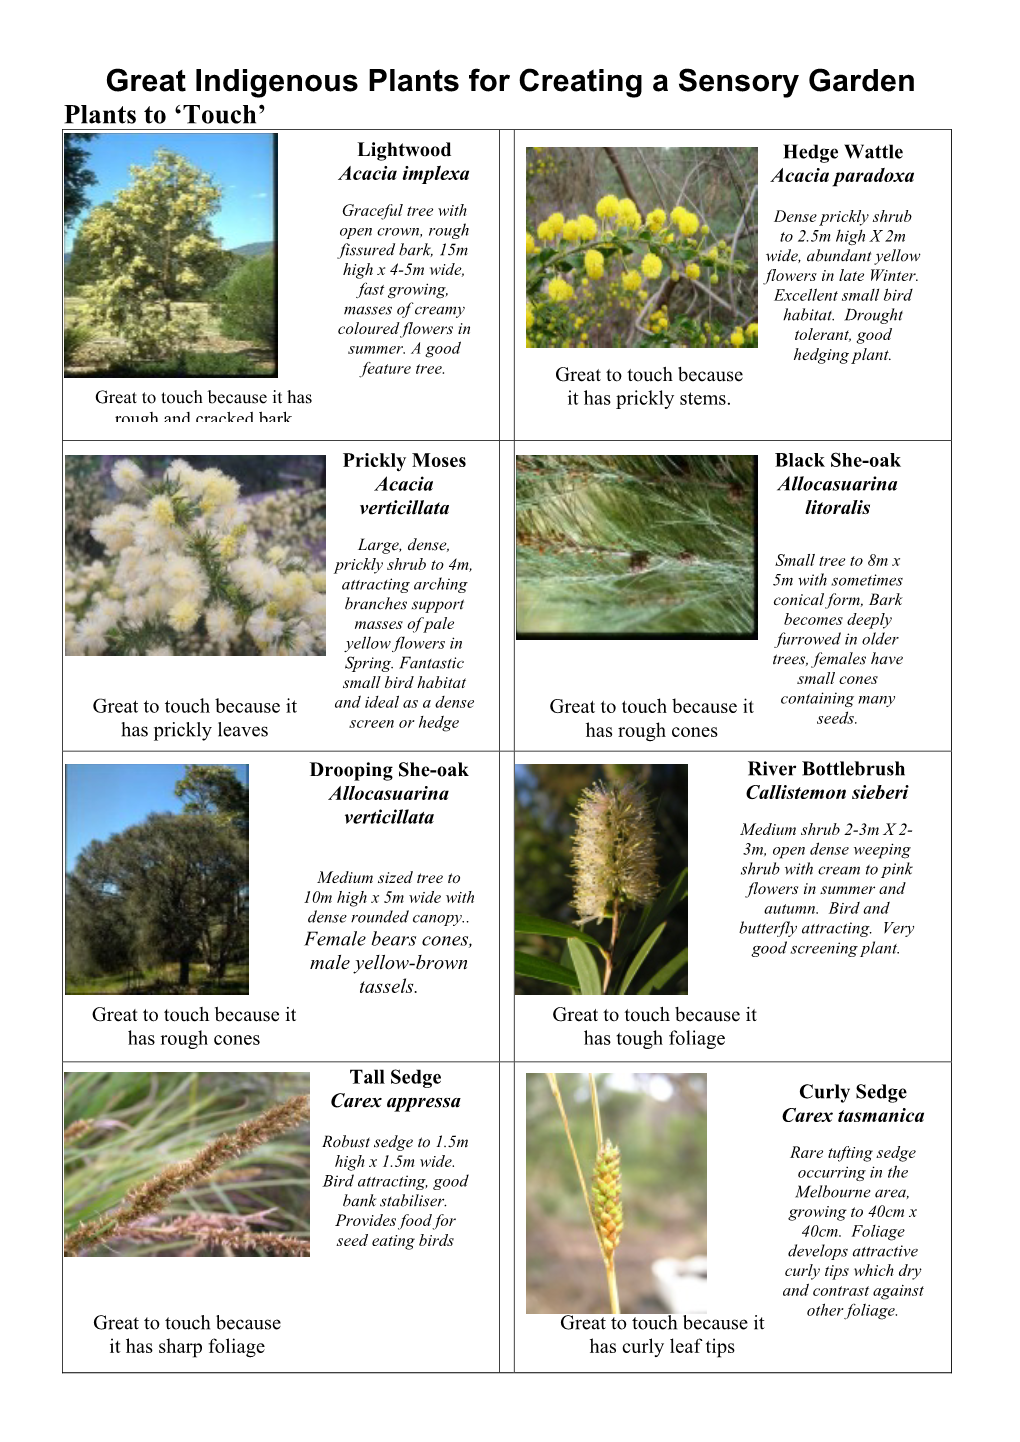 Great Indigenous Plants for Creating a Sensory Garden Plants to ‘Touch’ Lightwood Hedge Wattle Acacia Implexa Acacia Paradoxa